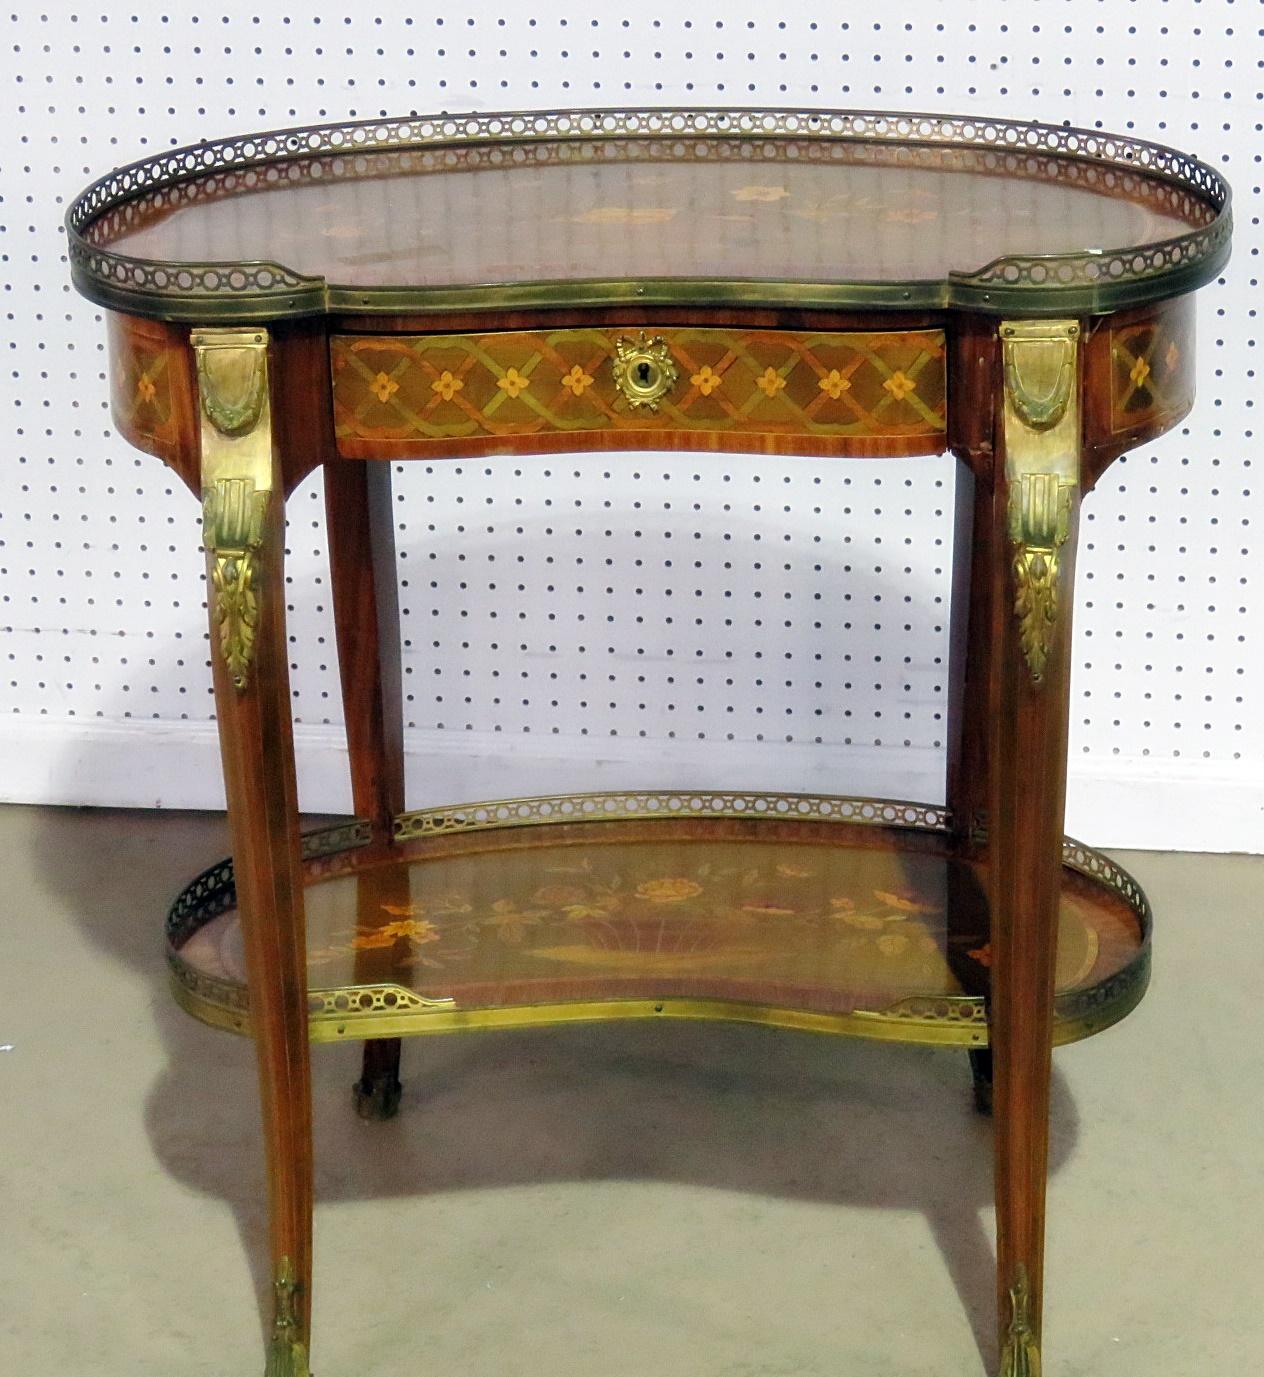 Louis XV style intricately inlaid one drawer accent table with a brass gallery and mounts.